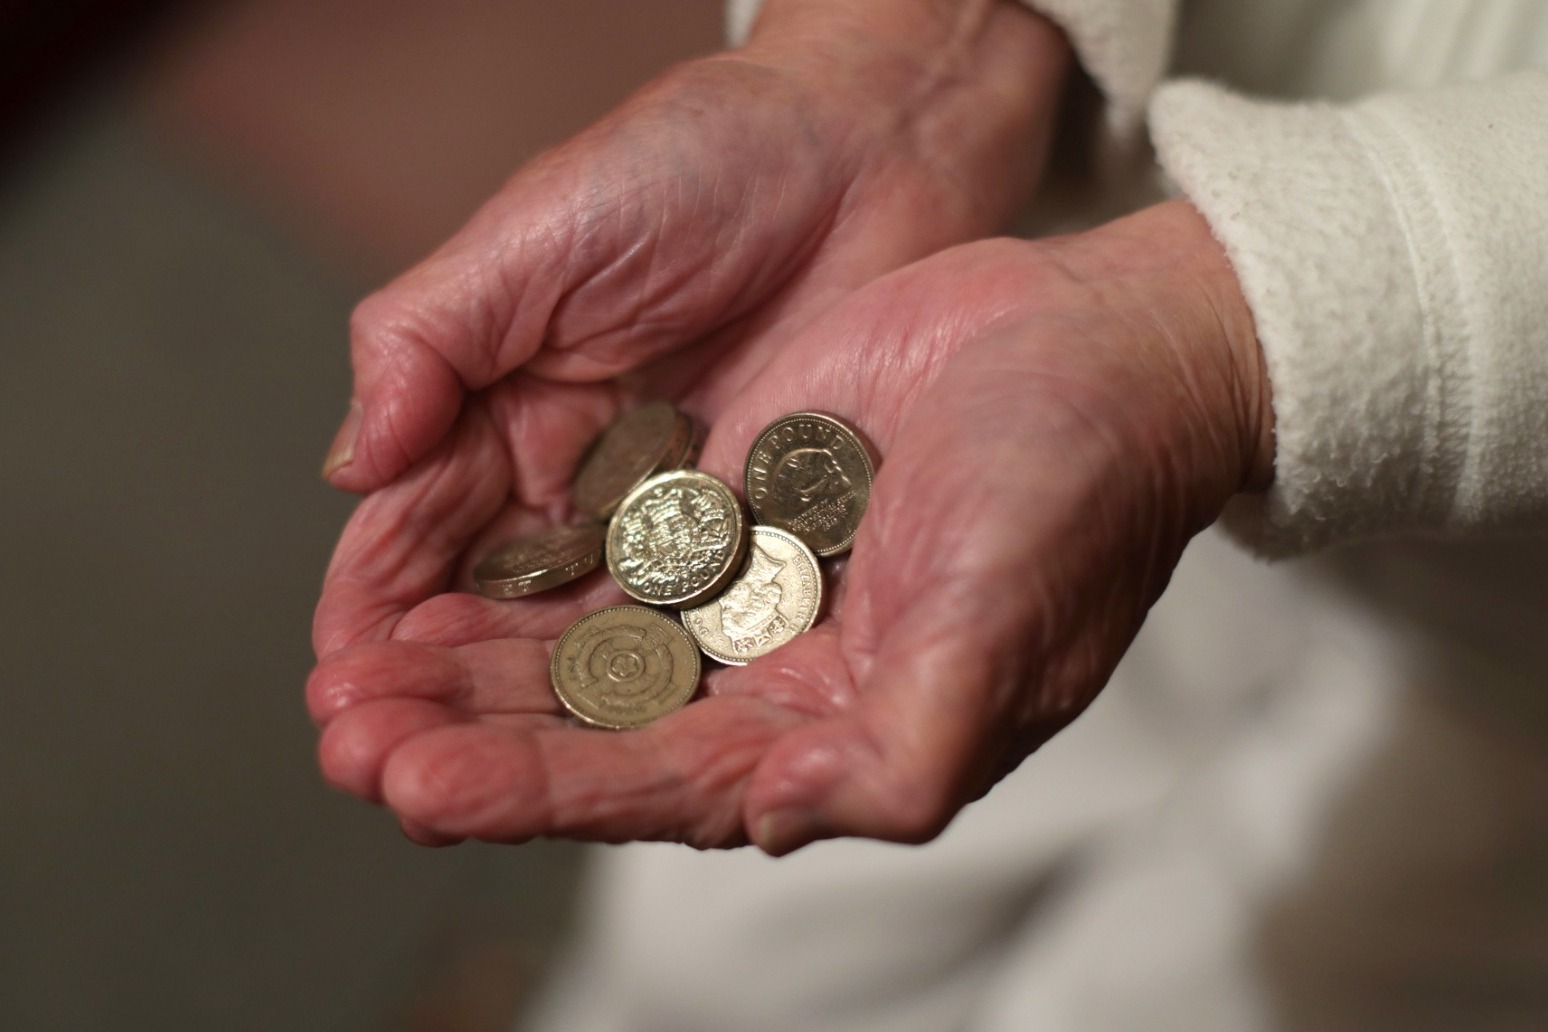 More 65 year olds living in poverty as state pension age rose to 66 says IFS